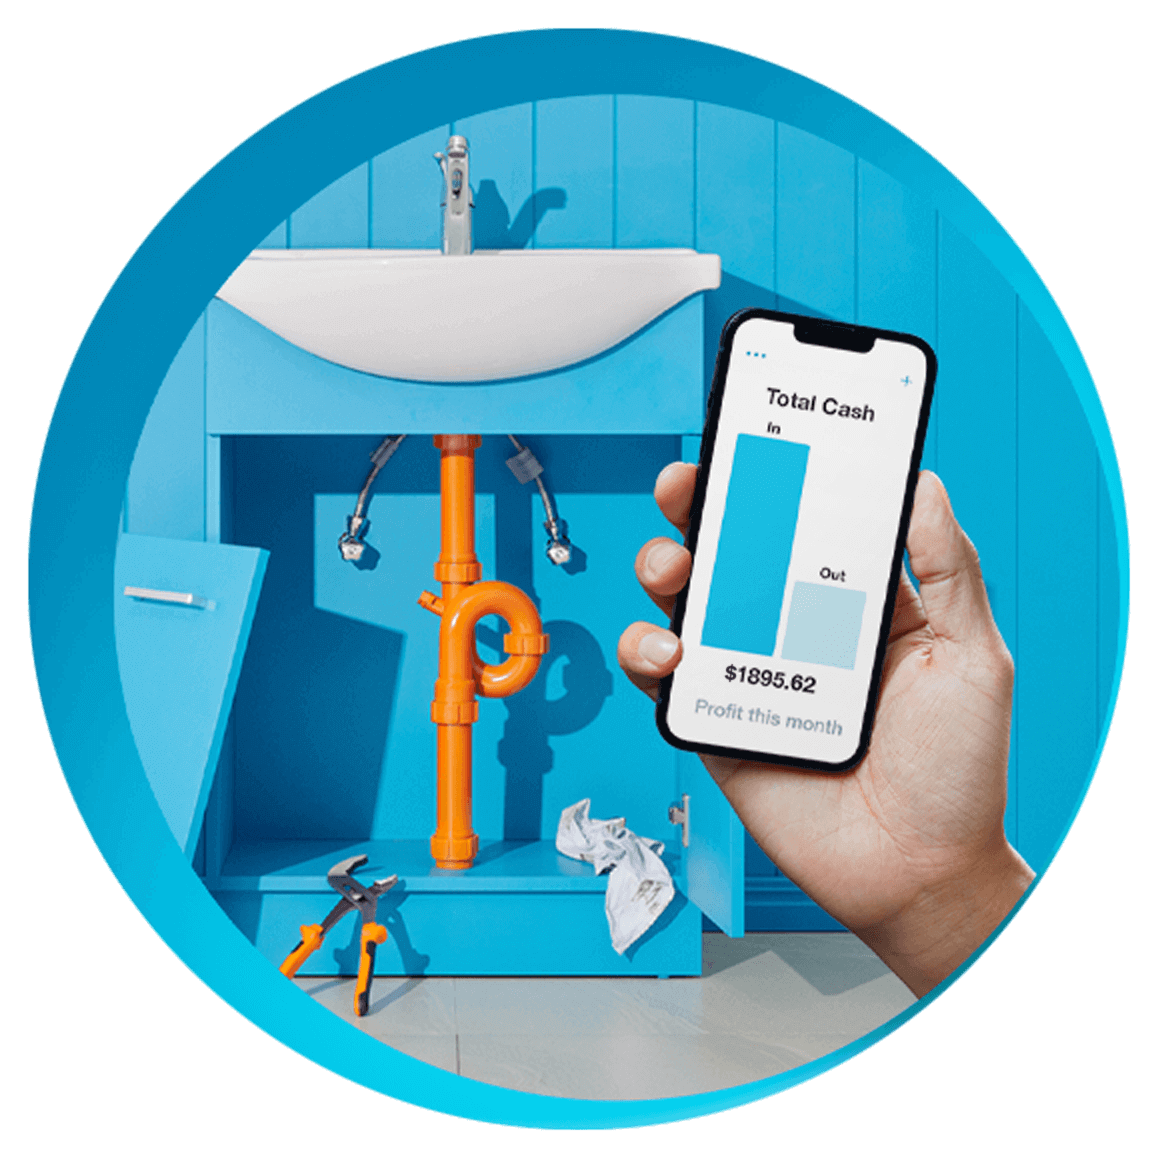 Hand holding phone with Xero app, in front of a bathroom sink under construction